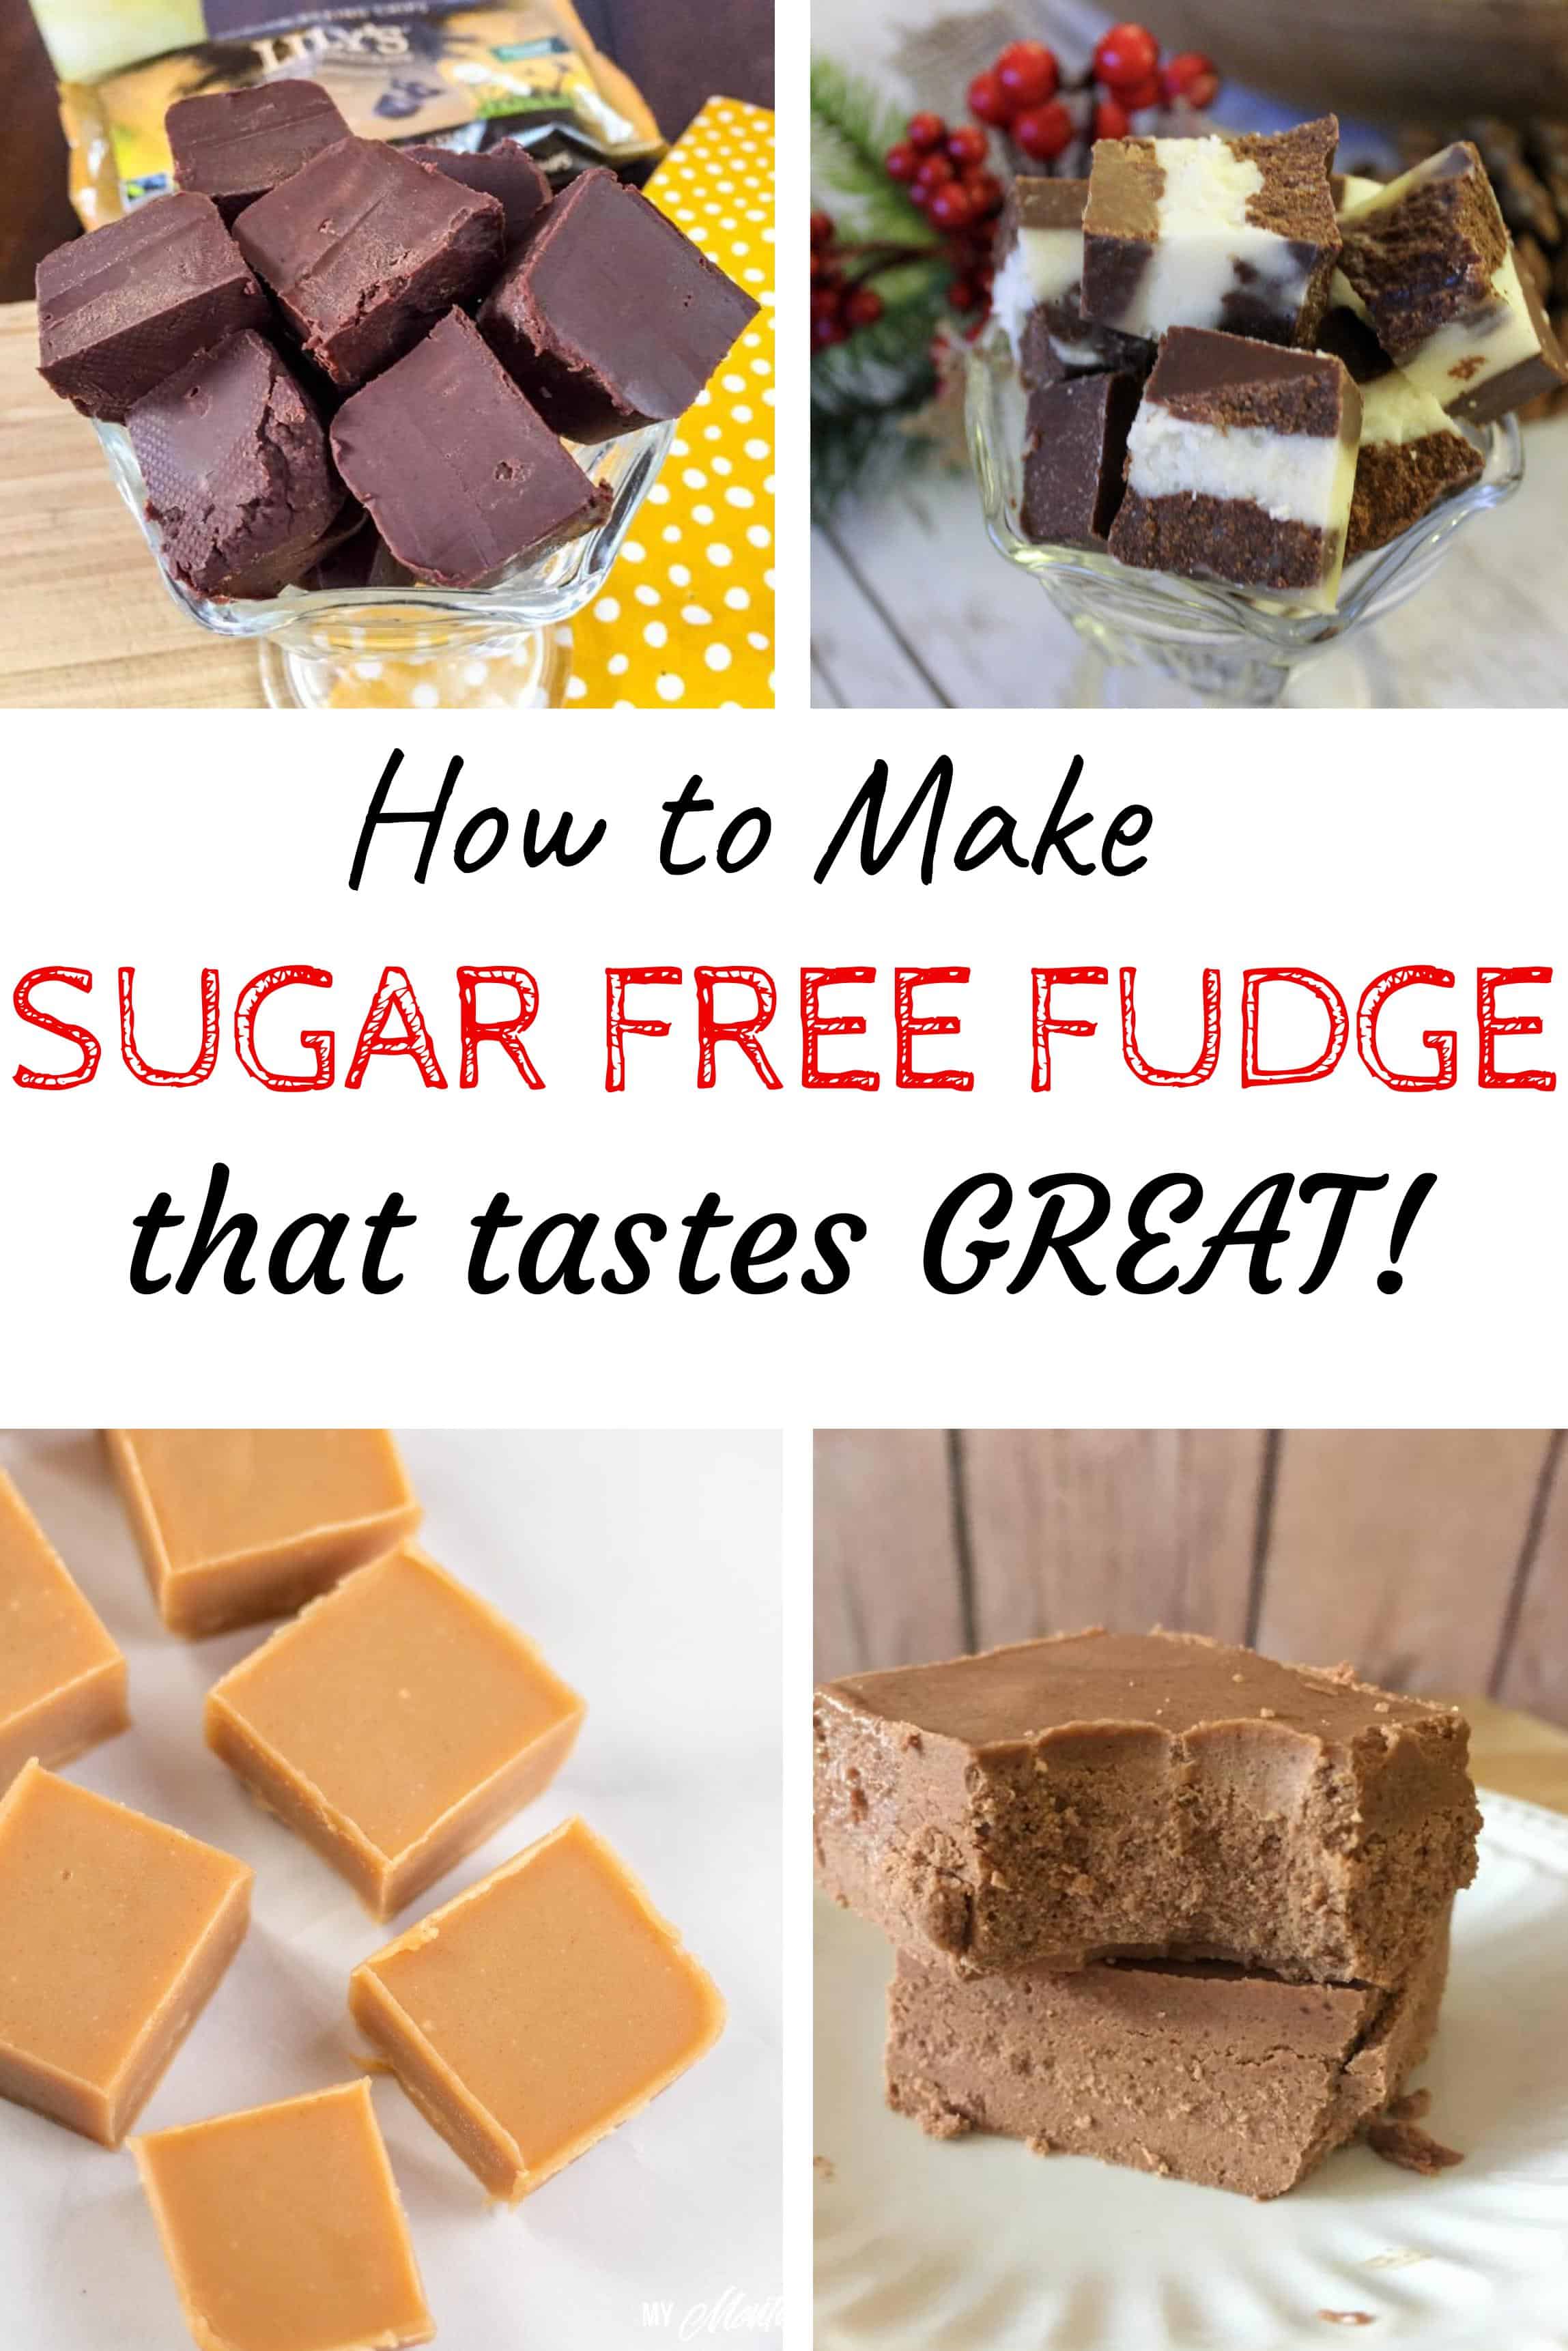 It is super simple to make great tasting sugar free fudge. Only a handful of ingredients and a few moments, then you can have a delicious treat whenever you want! These recipes make great low carb fudge and keto fudge easy! #keto #lowcarb #healthyfudge #sugarfreefudge #trimhealthymama #thm #thmfudge #sugarfree #fudge #2ingredientfudge